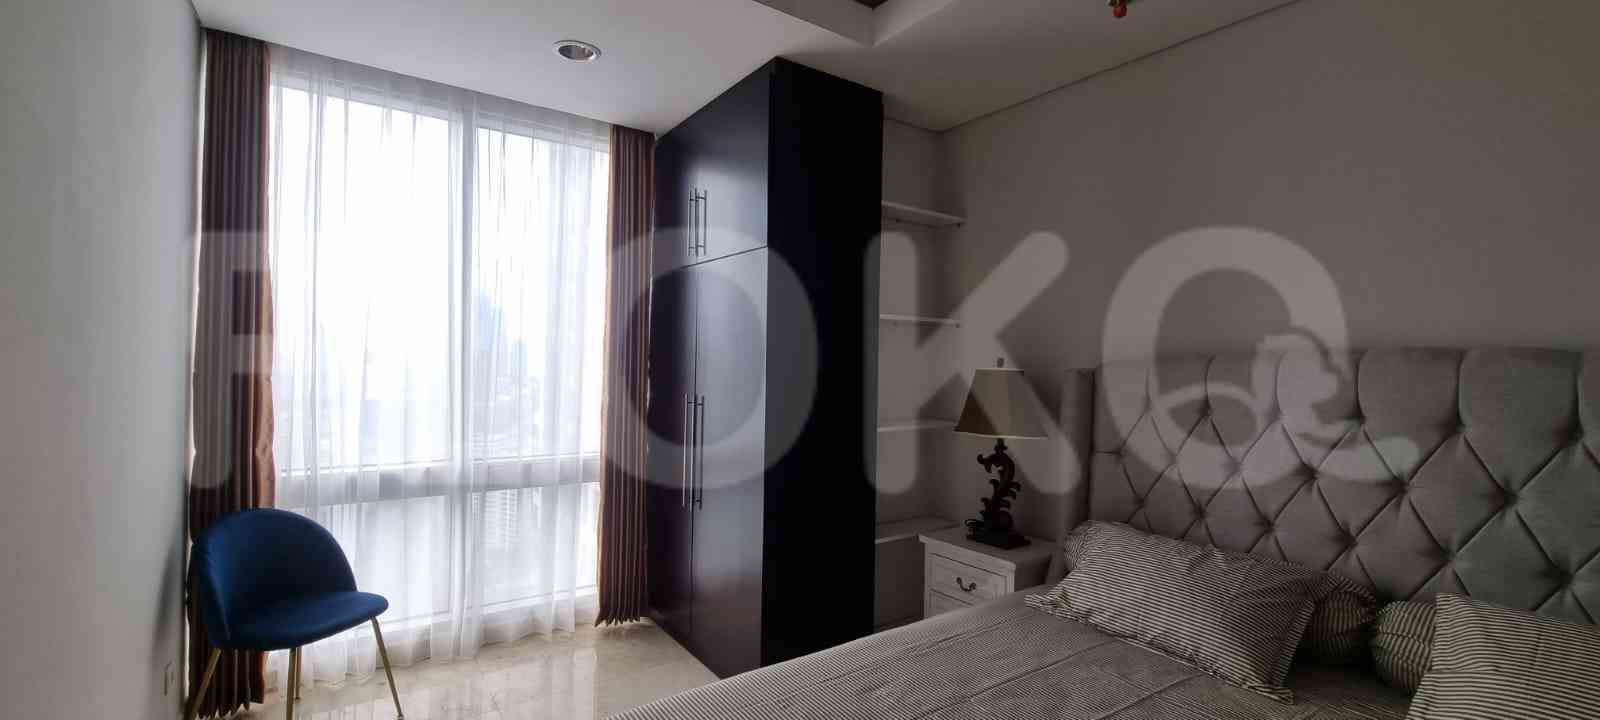 2 Bedroom on 36th Floor for Rent in The Grove Apartment - fku510 2